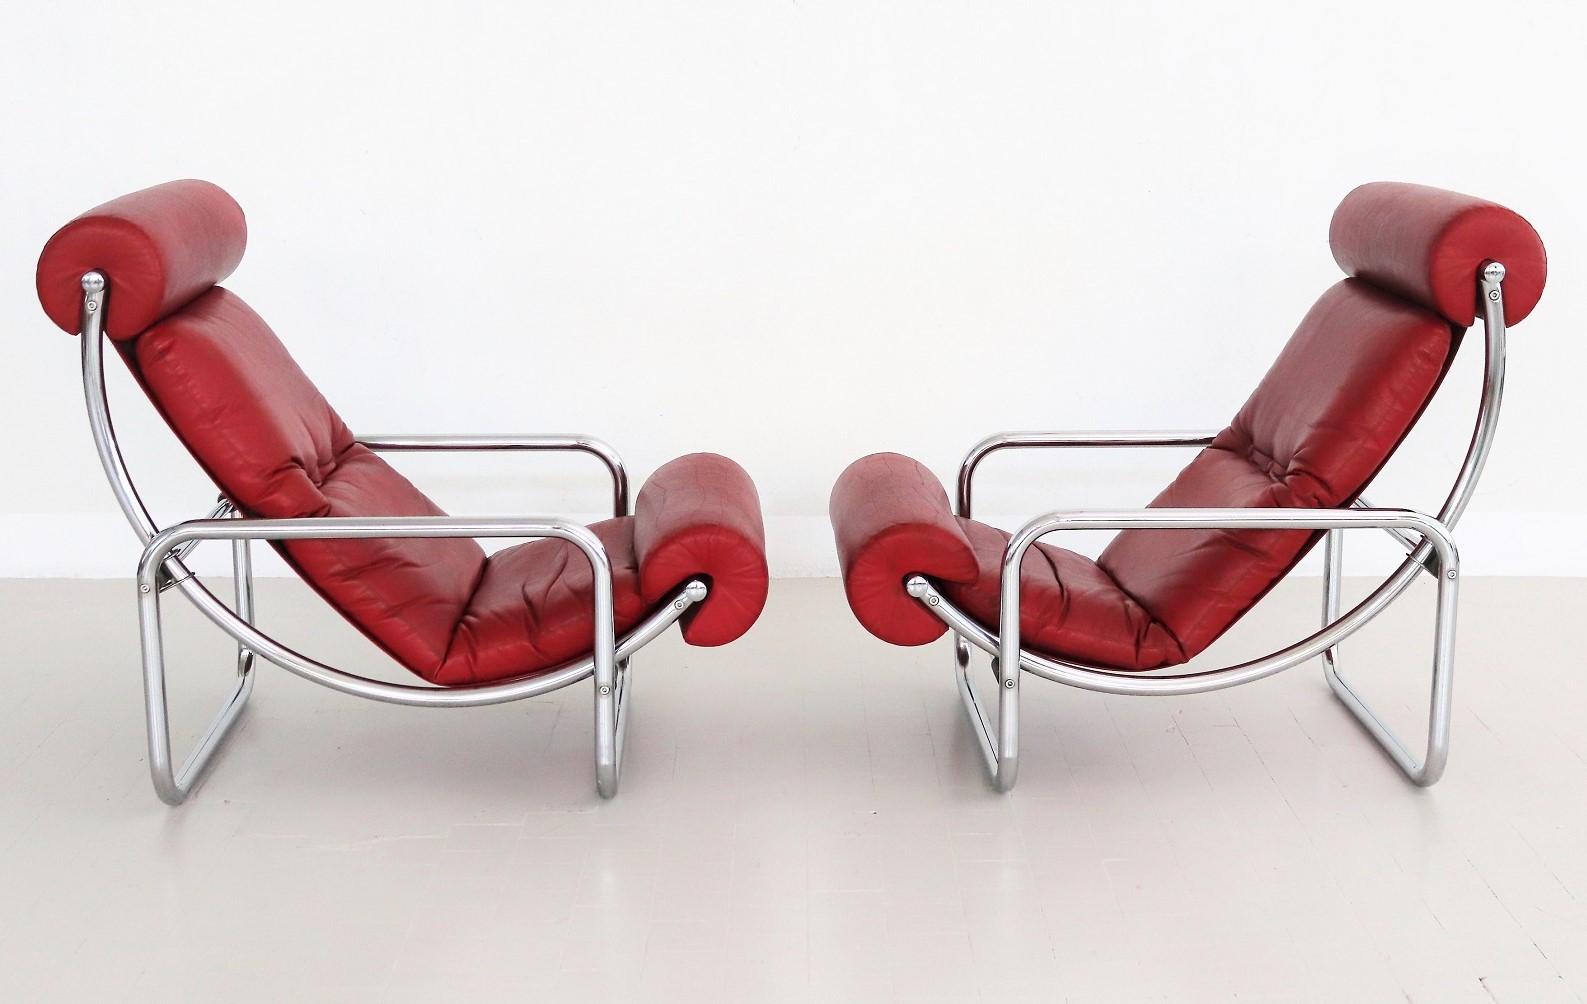 Gorgeous pair of tubular chrome lounge chairs with leatherette cushions in red color.
Made in Italy in the 1960s.
The position of the chairs can be changed by sliding the chairs up - or down. 
The given position is hold properly thanks to the